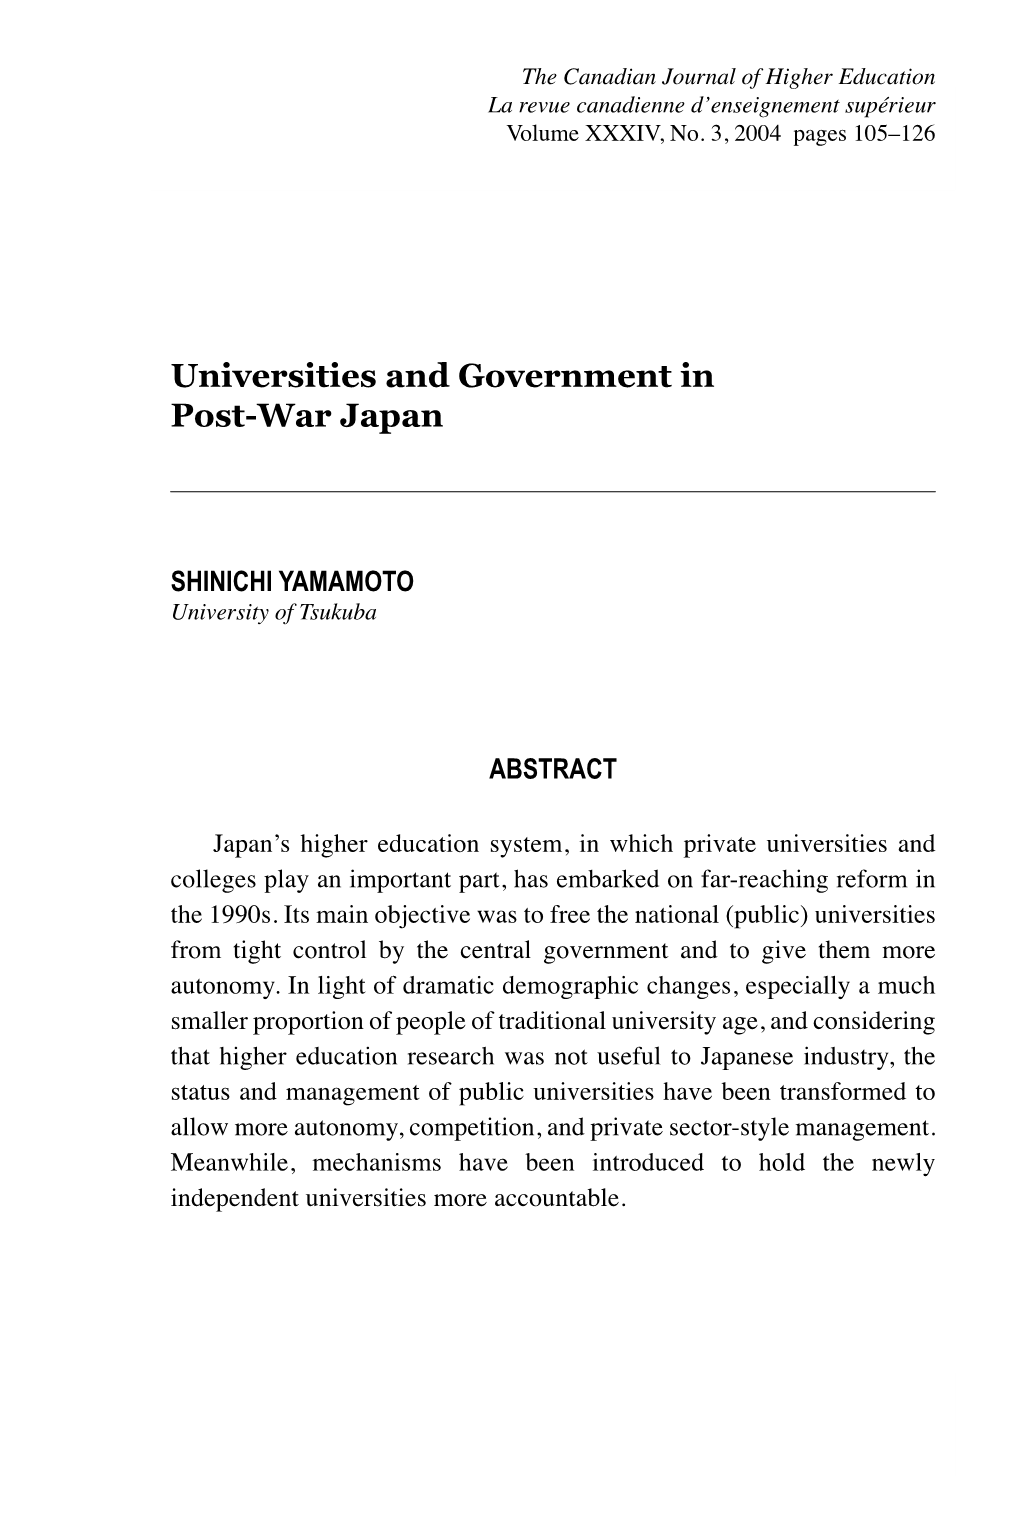 Universities and Government in Post-War Japan 105 Volume XXXIV, No